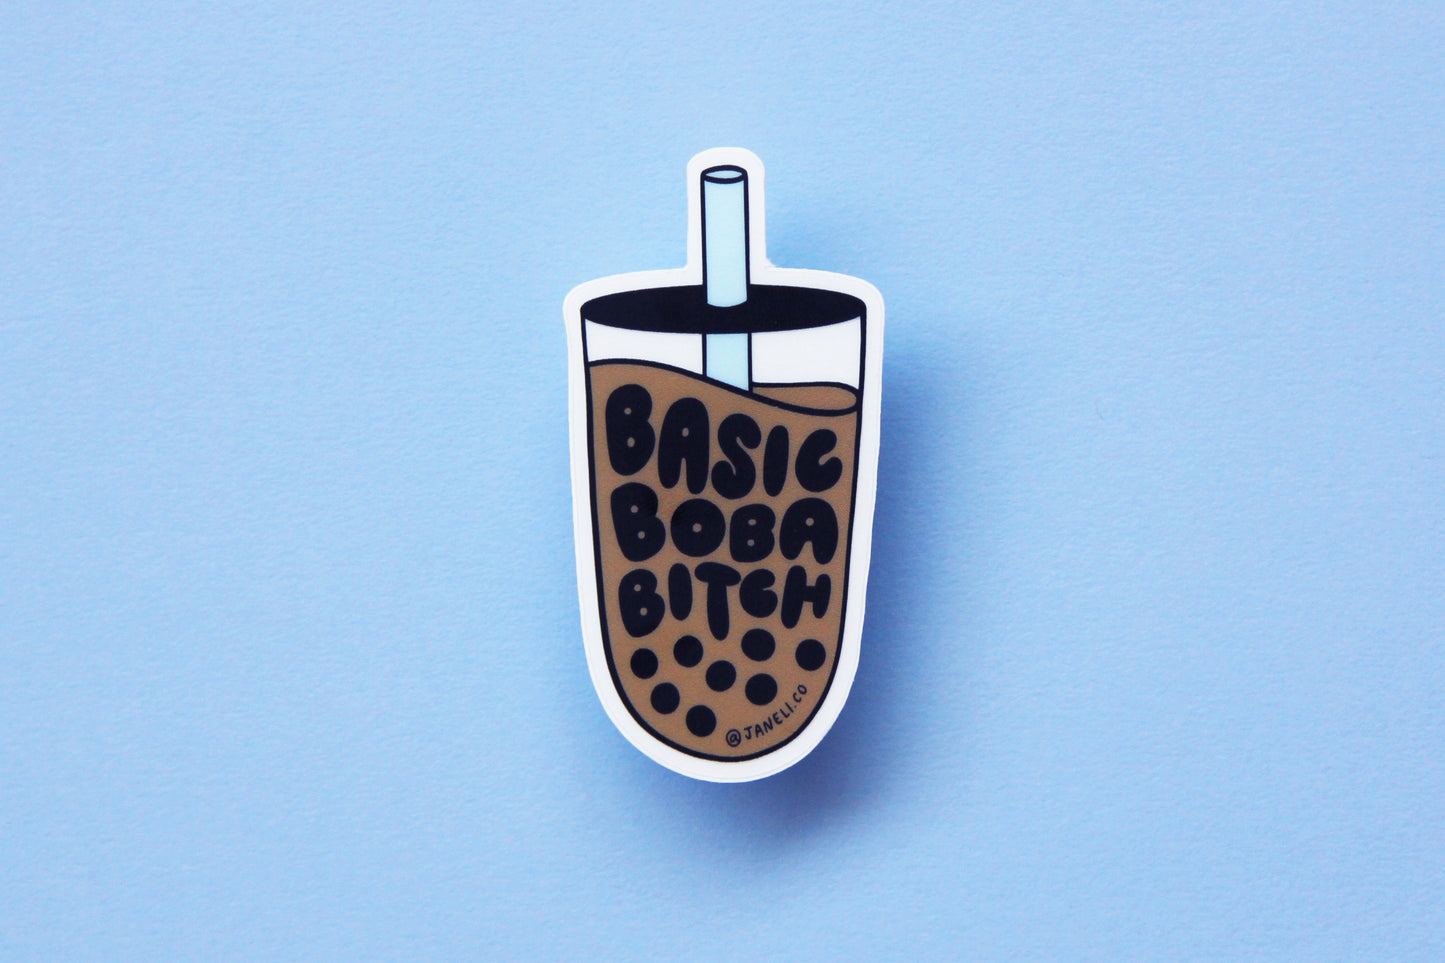 A JaneLi.Co sticker that says "Basic Boba Bitch" in the shape of a cup of boba over a sky blue background. 